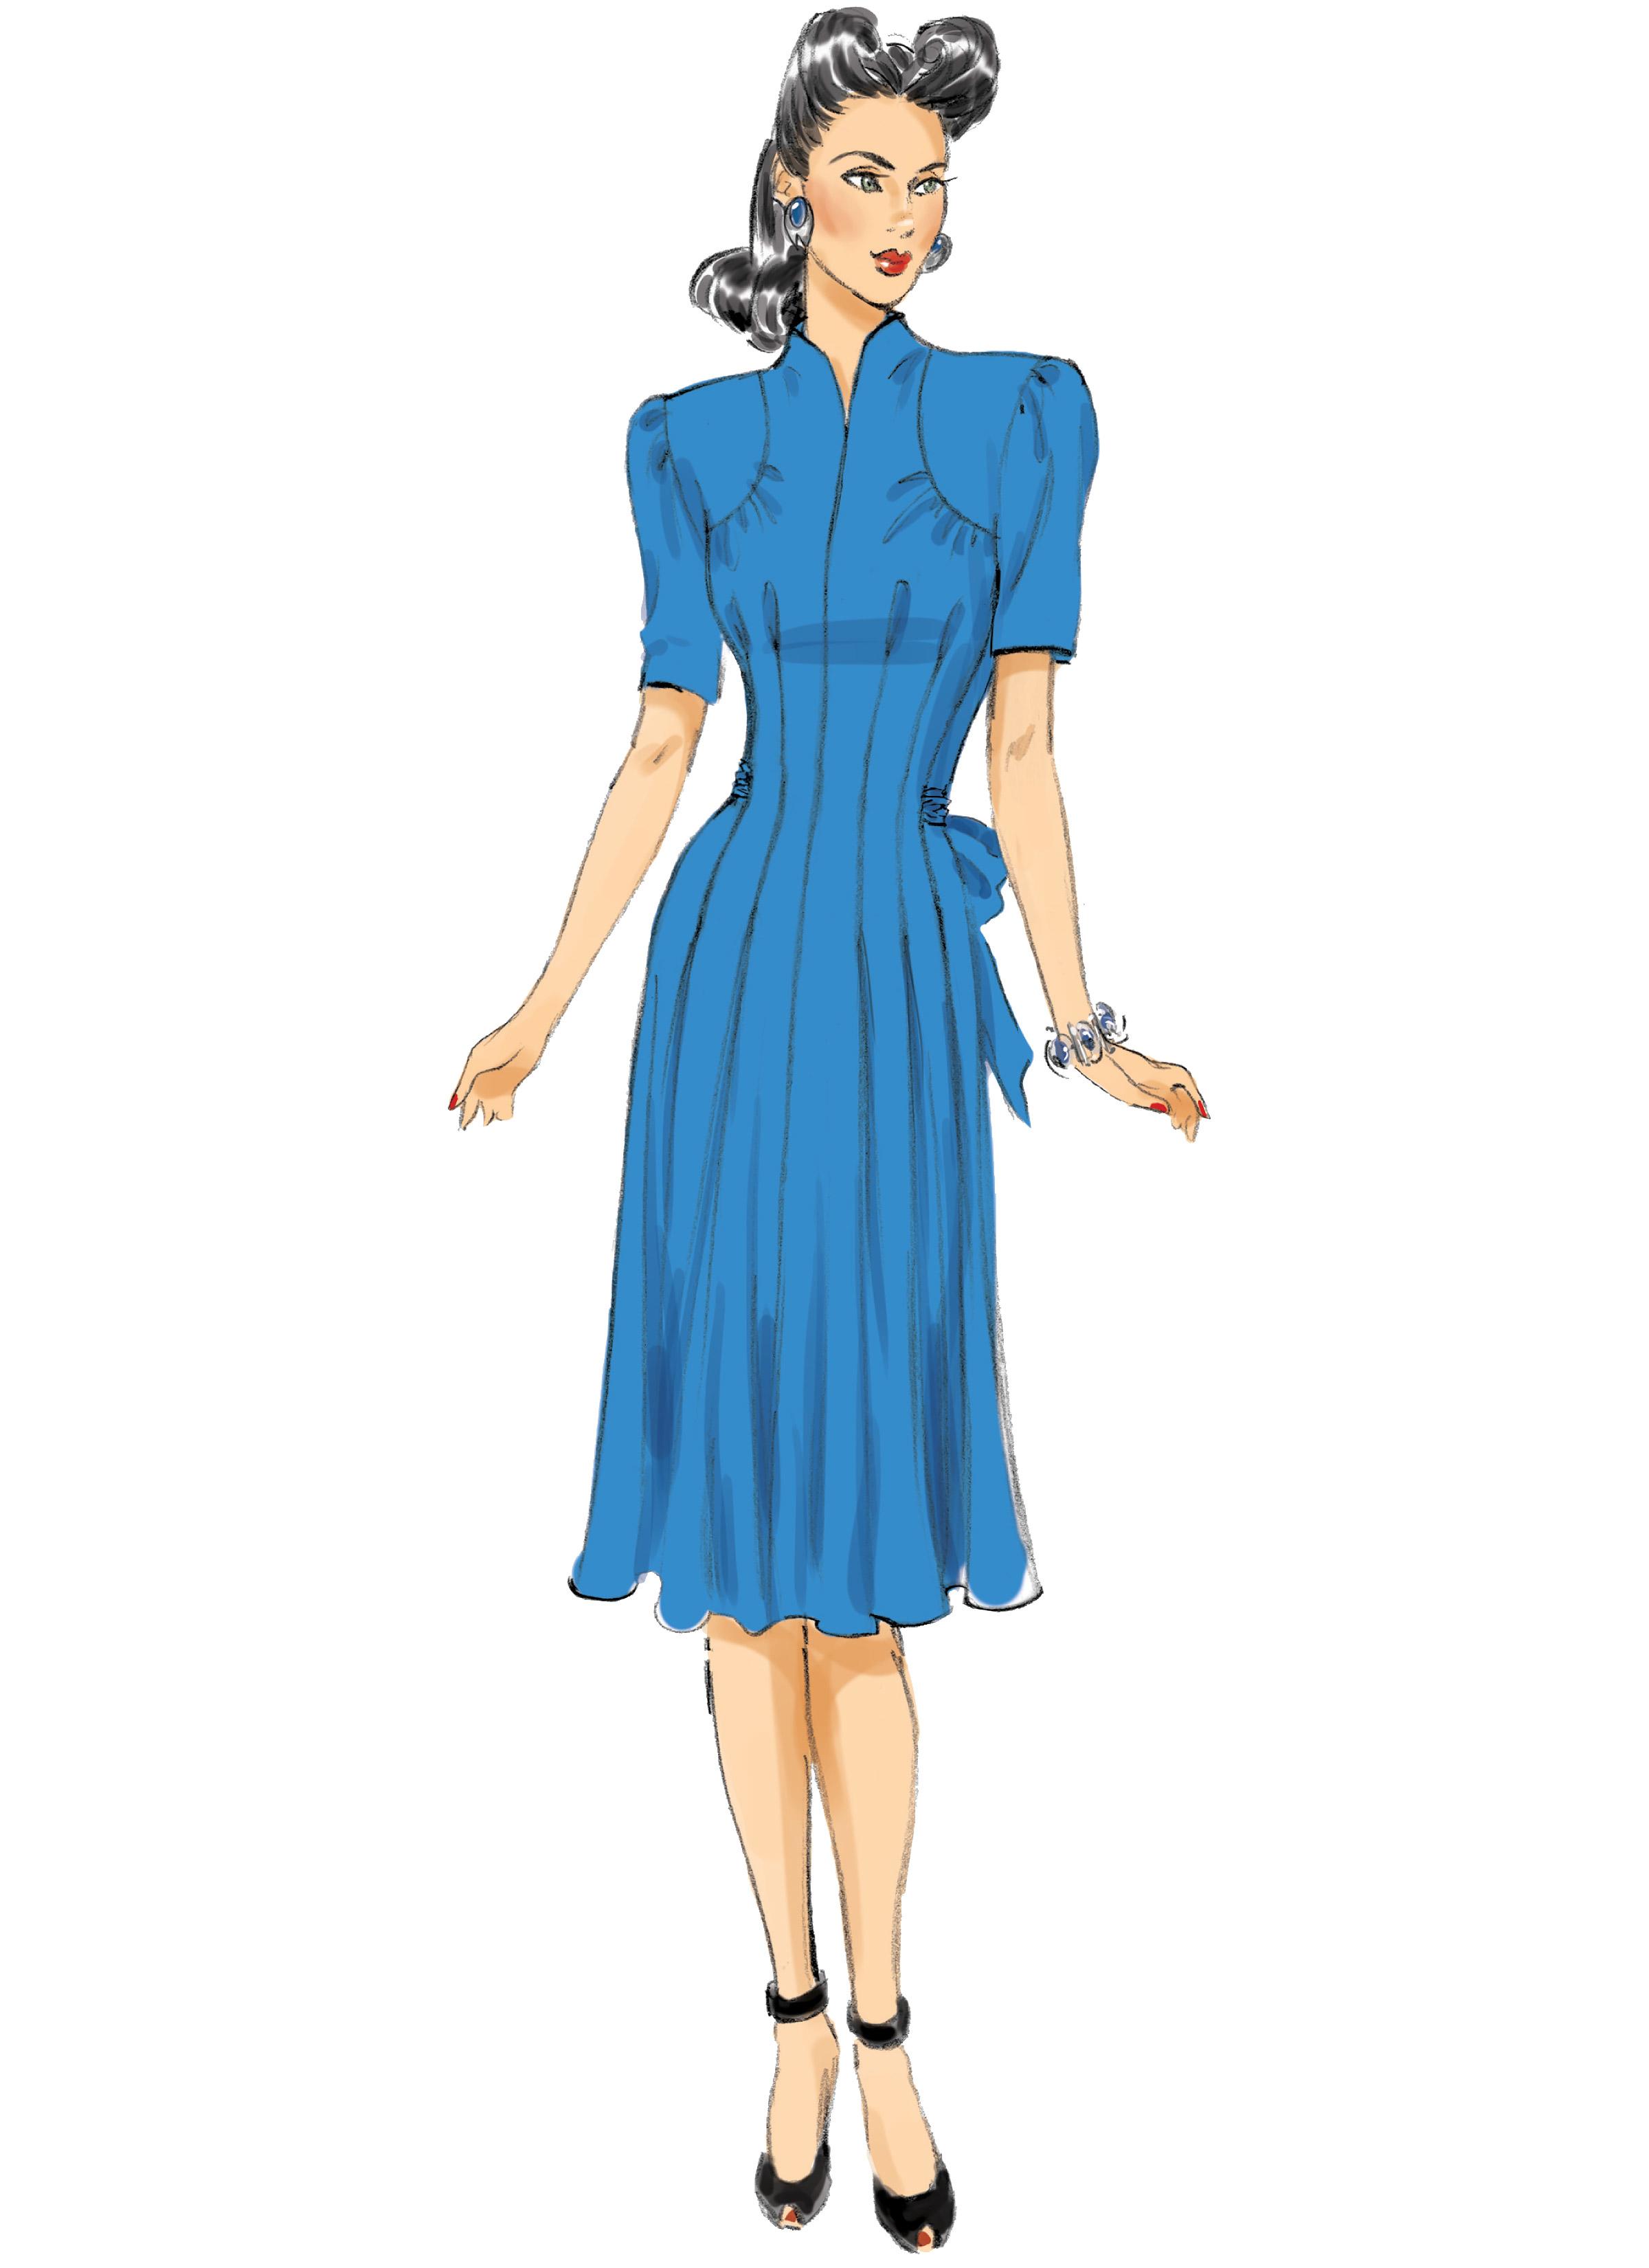 Butterick B6485 Misses' Dresses with Shoulder and Bust Detail, Waist Tie, and Sleeve Variations